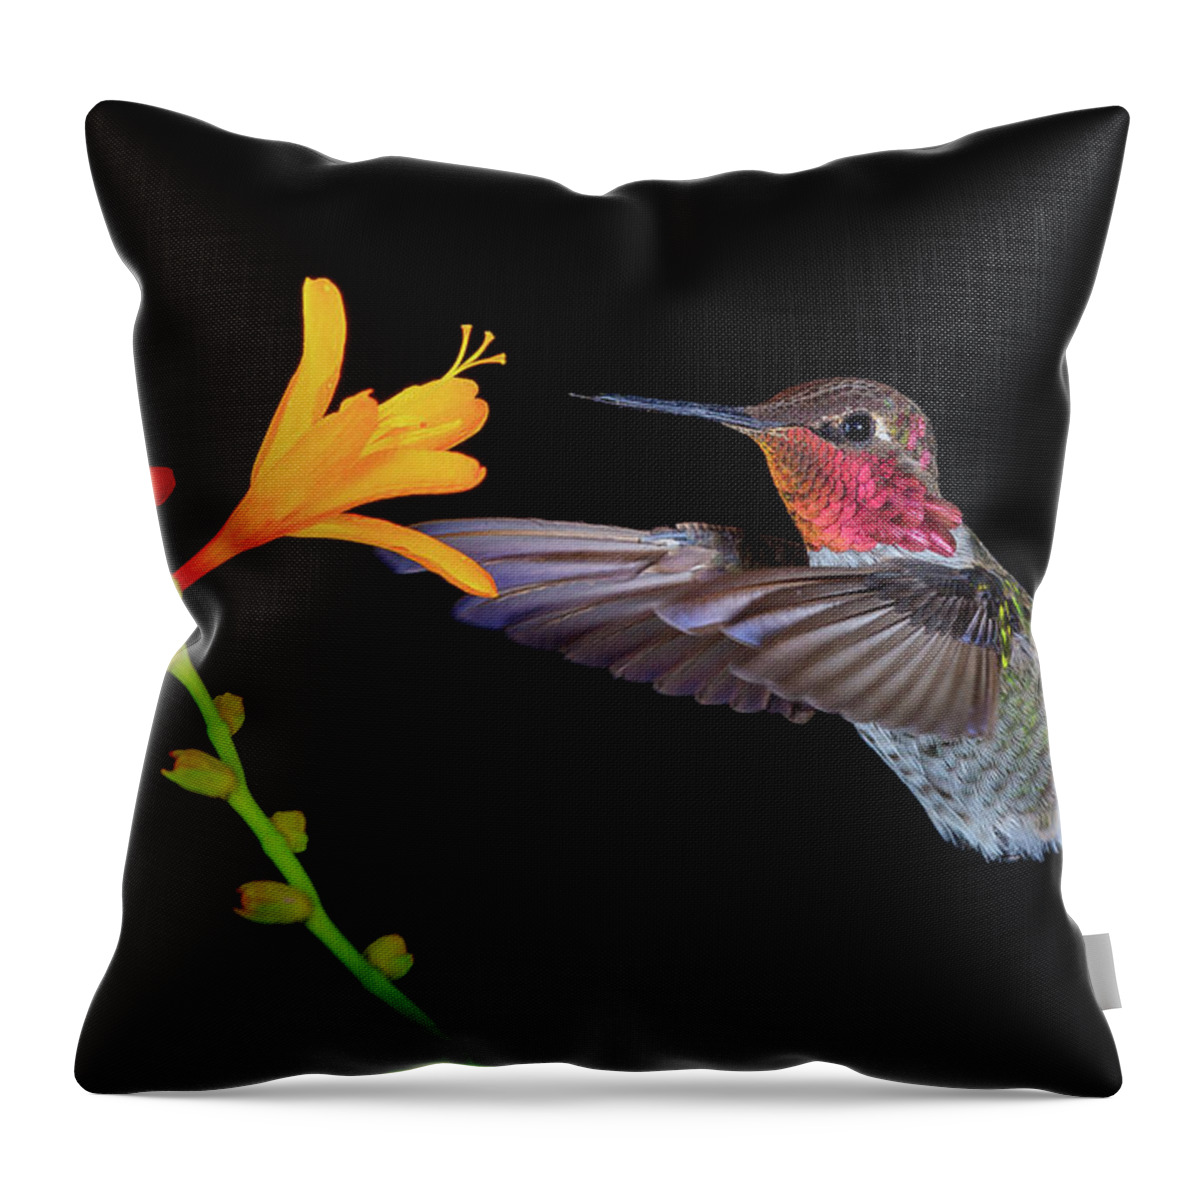 Animal Throw Pillow featuring the photograph Summer Loving by Briand Sanderson